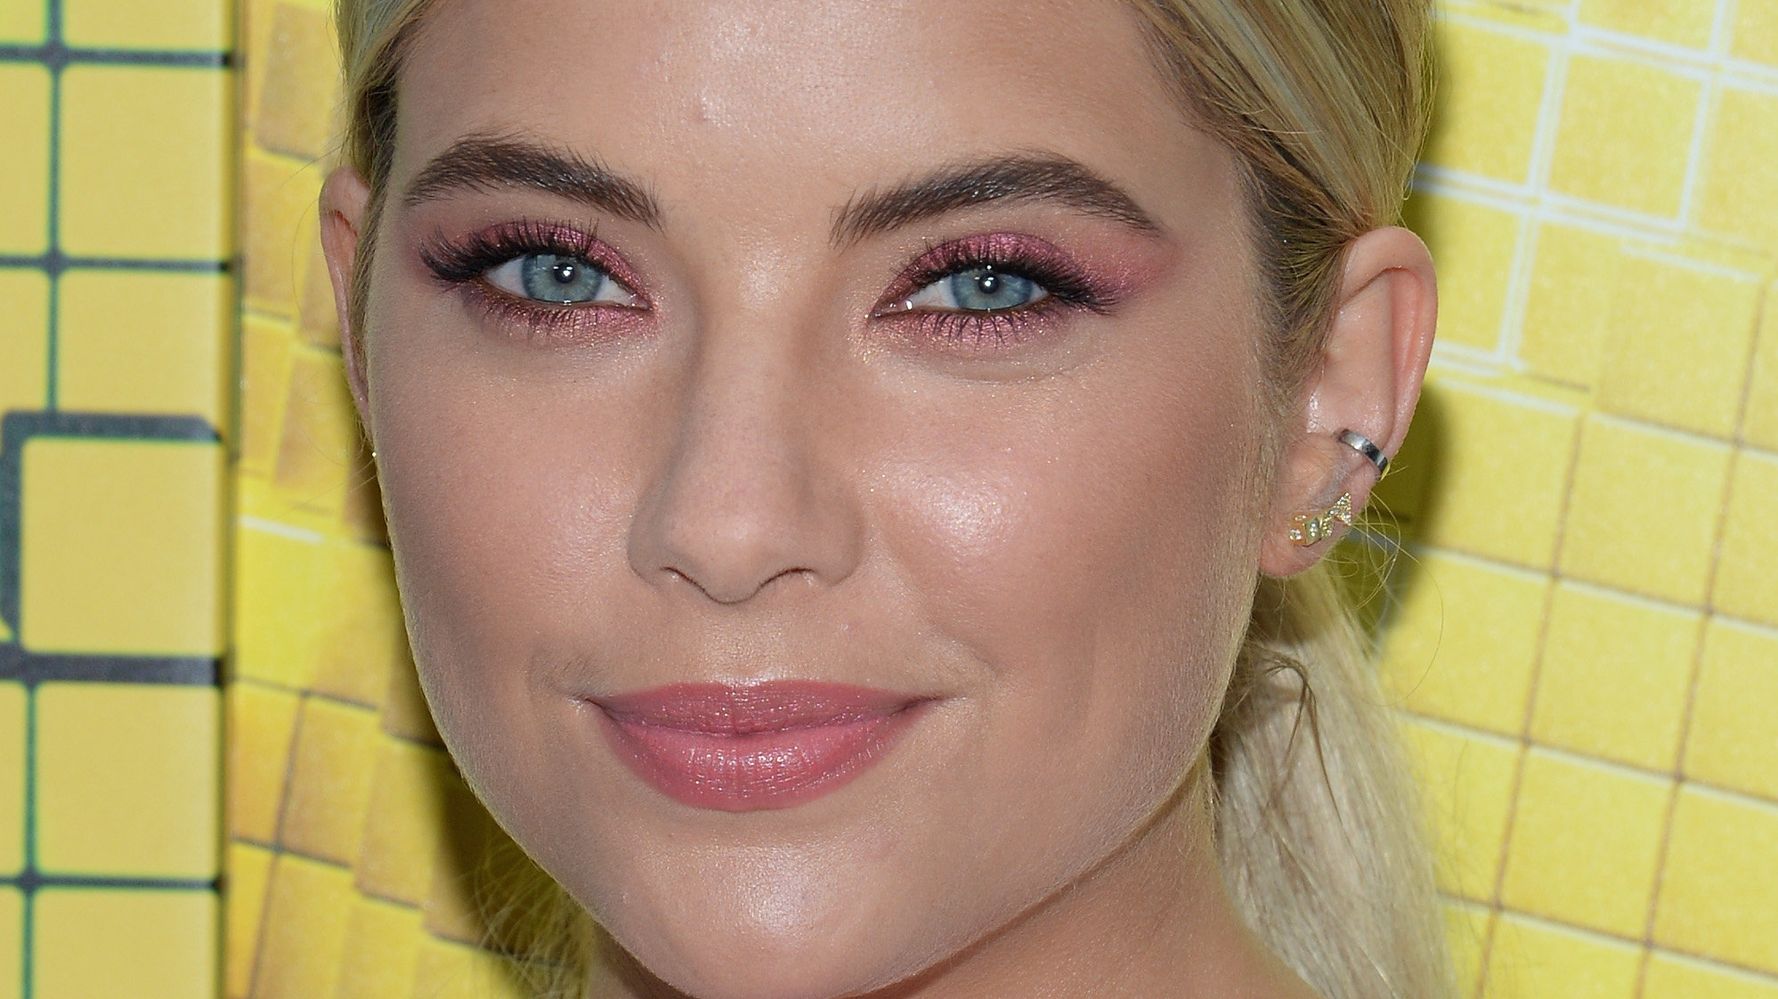 Ashley Bensons Pink Eye Makeup And More Celebrity Beauty Looks We Loved This Week Huffpost Life